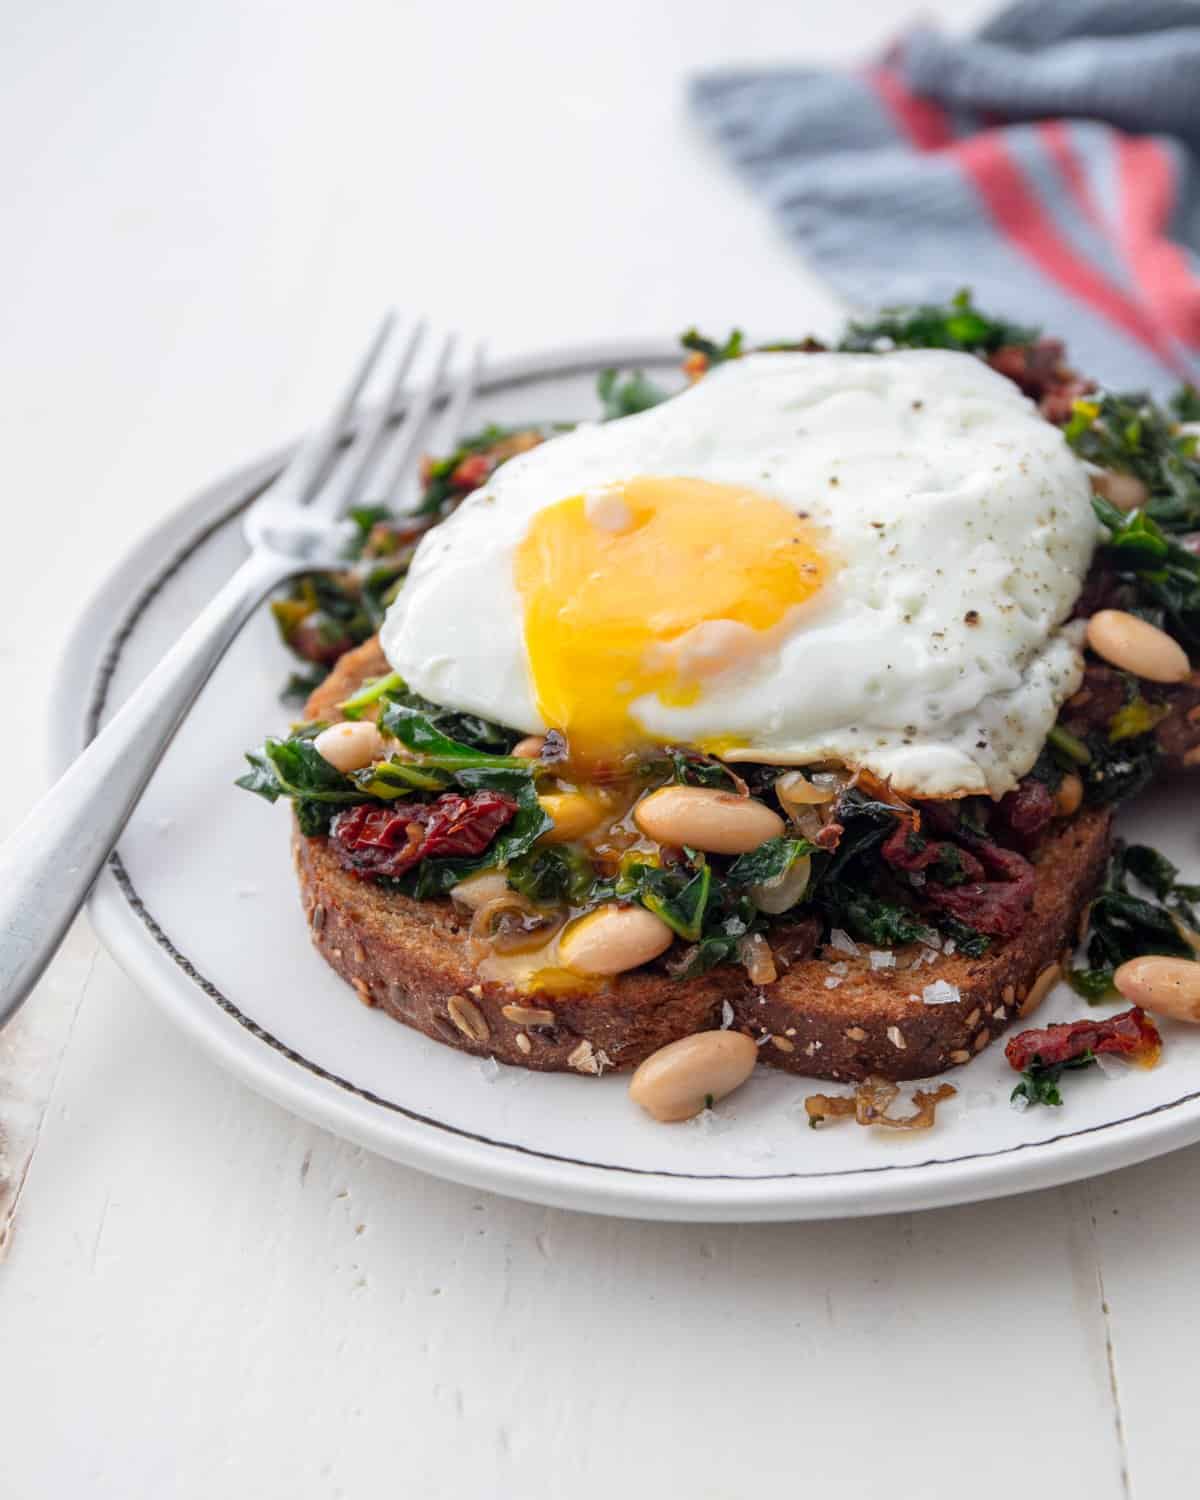 beans, kale and a fried egg on toast on a white plate